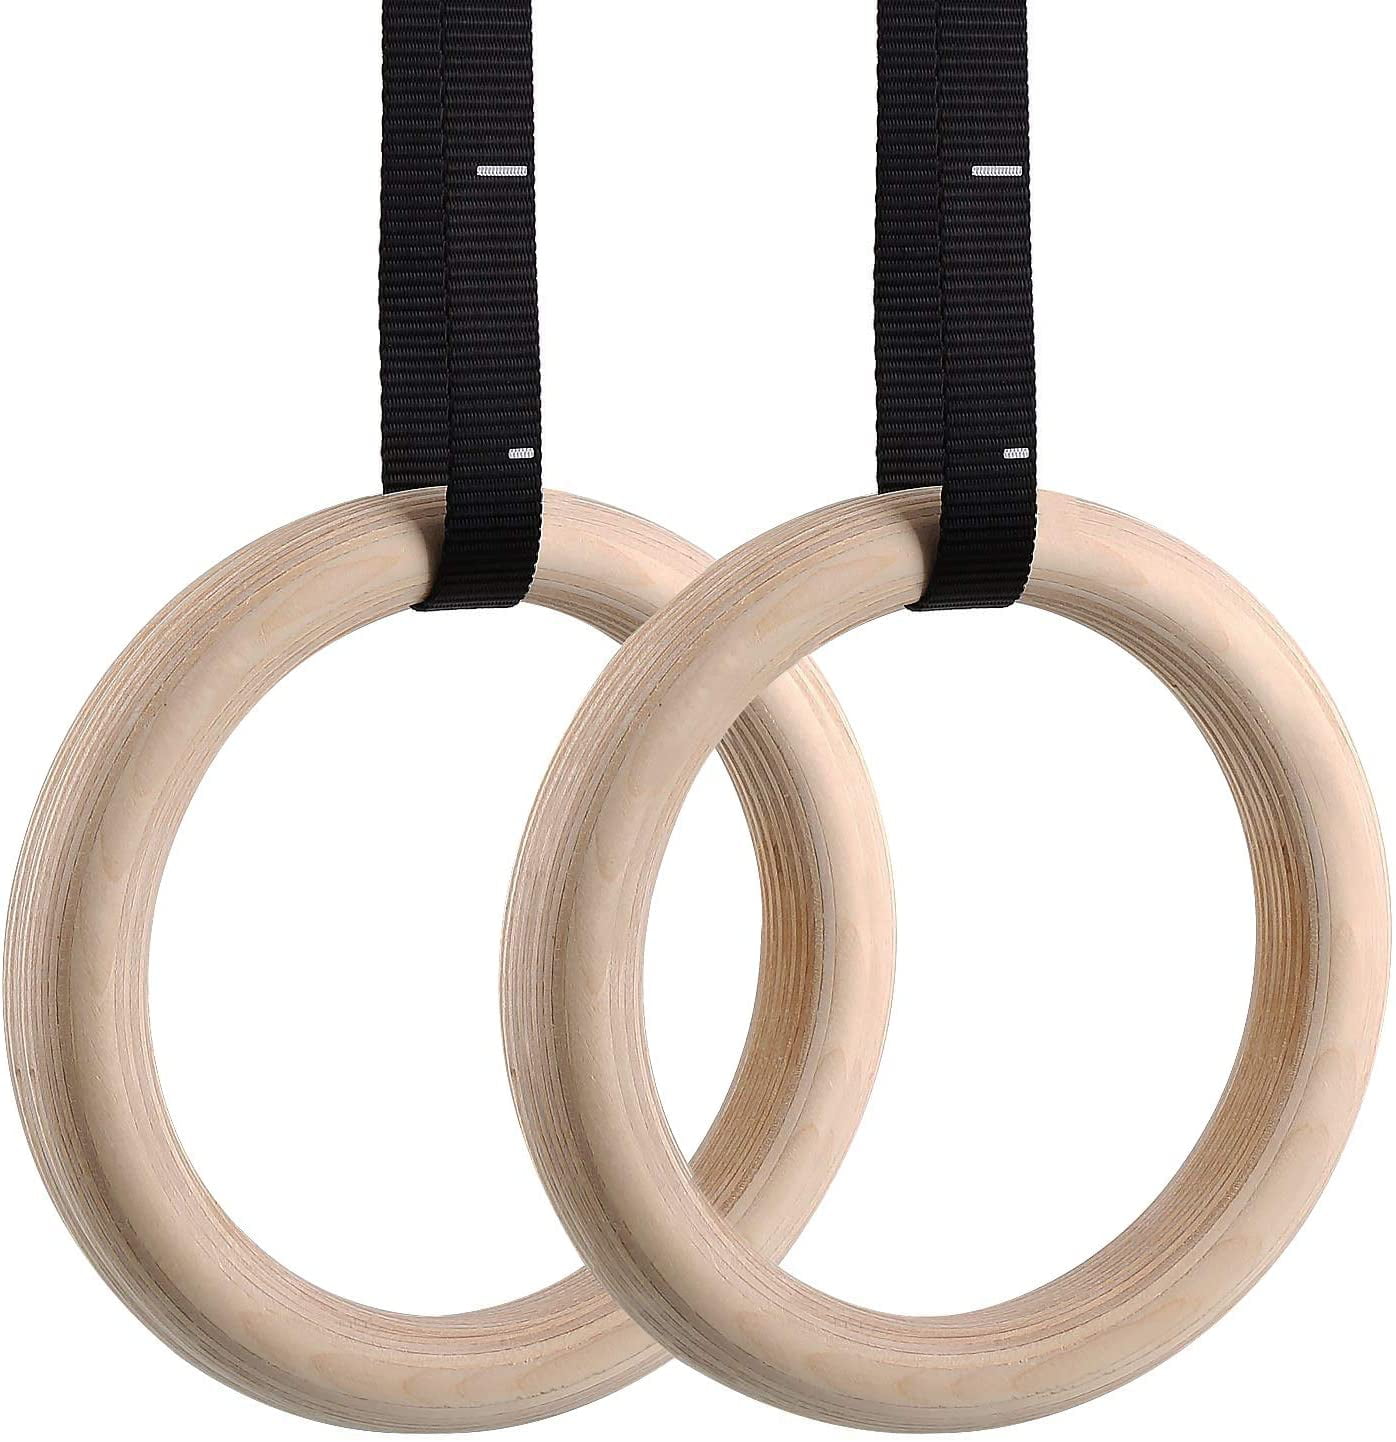 Gym Workout Training Strength with Straps Wooden Gymnastic Rings Fitness 